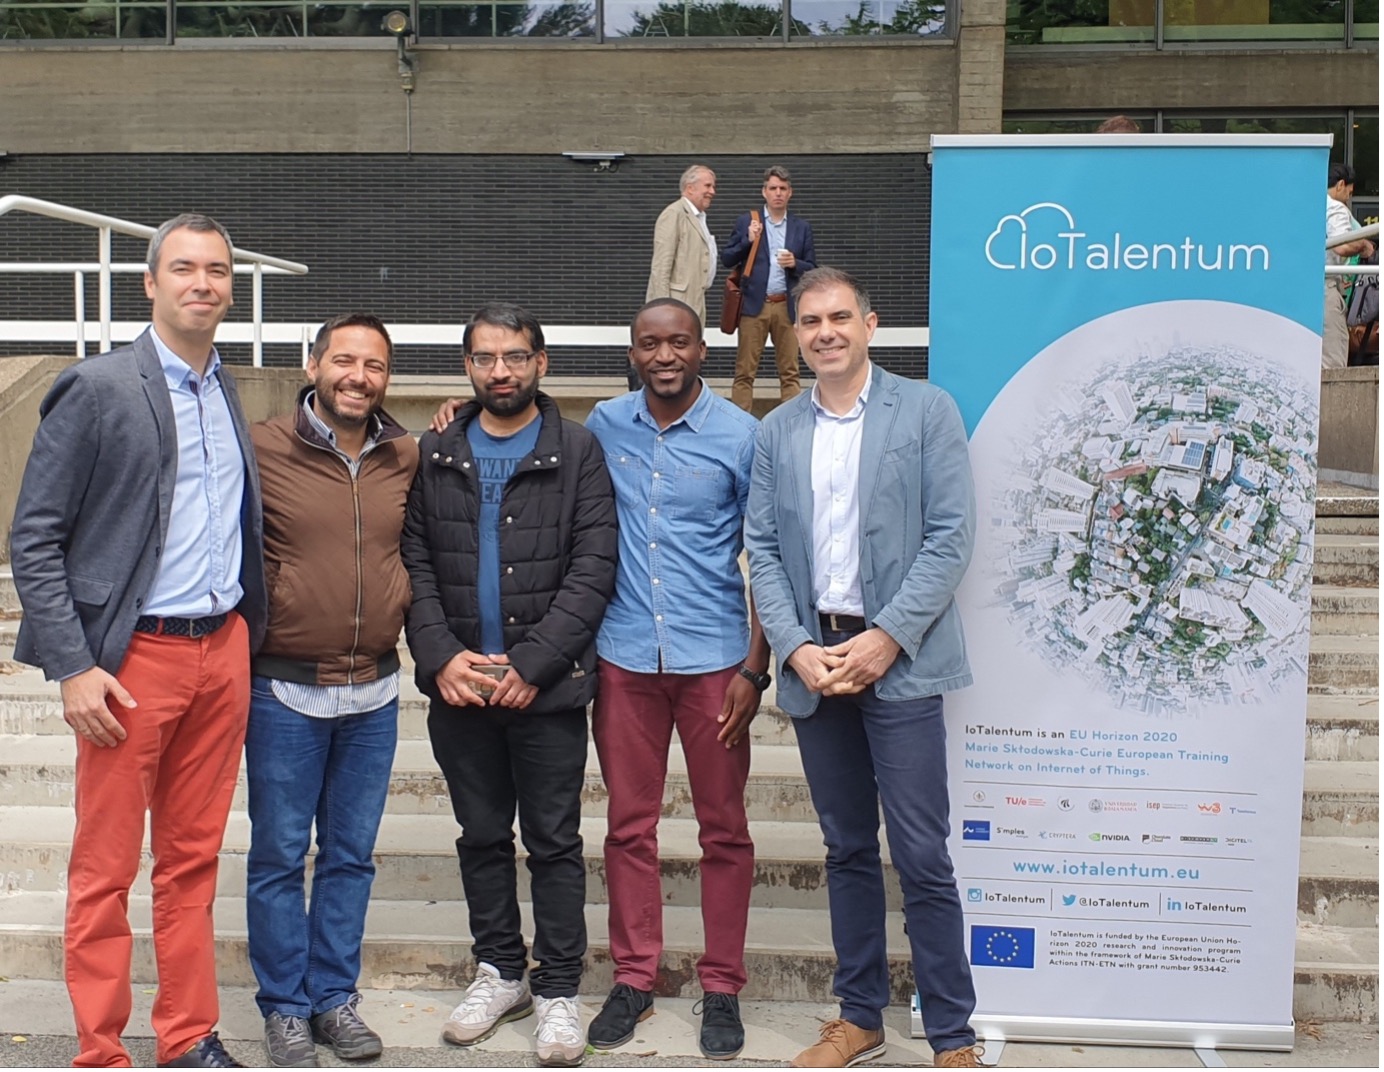 ISEP researchers at IoTalentum Third Network Meeting, 4-8 July 2022.